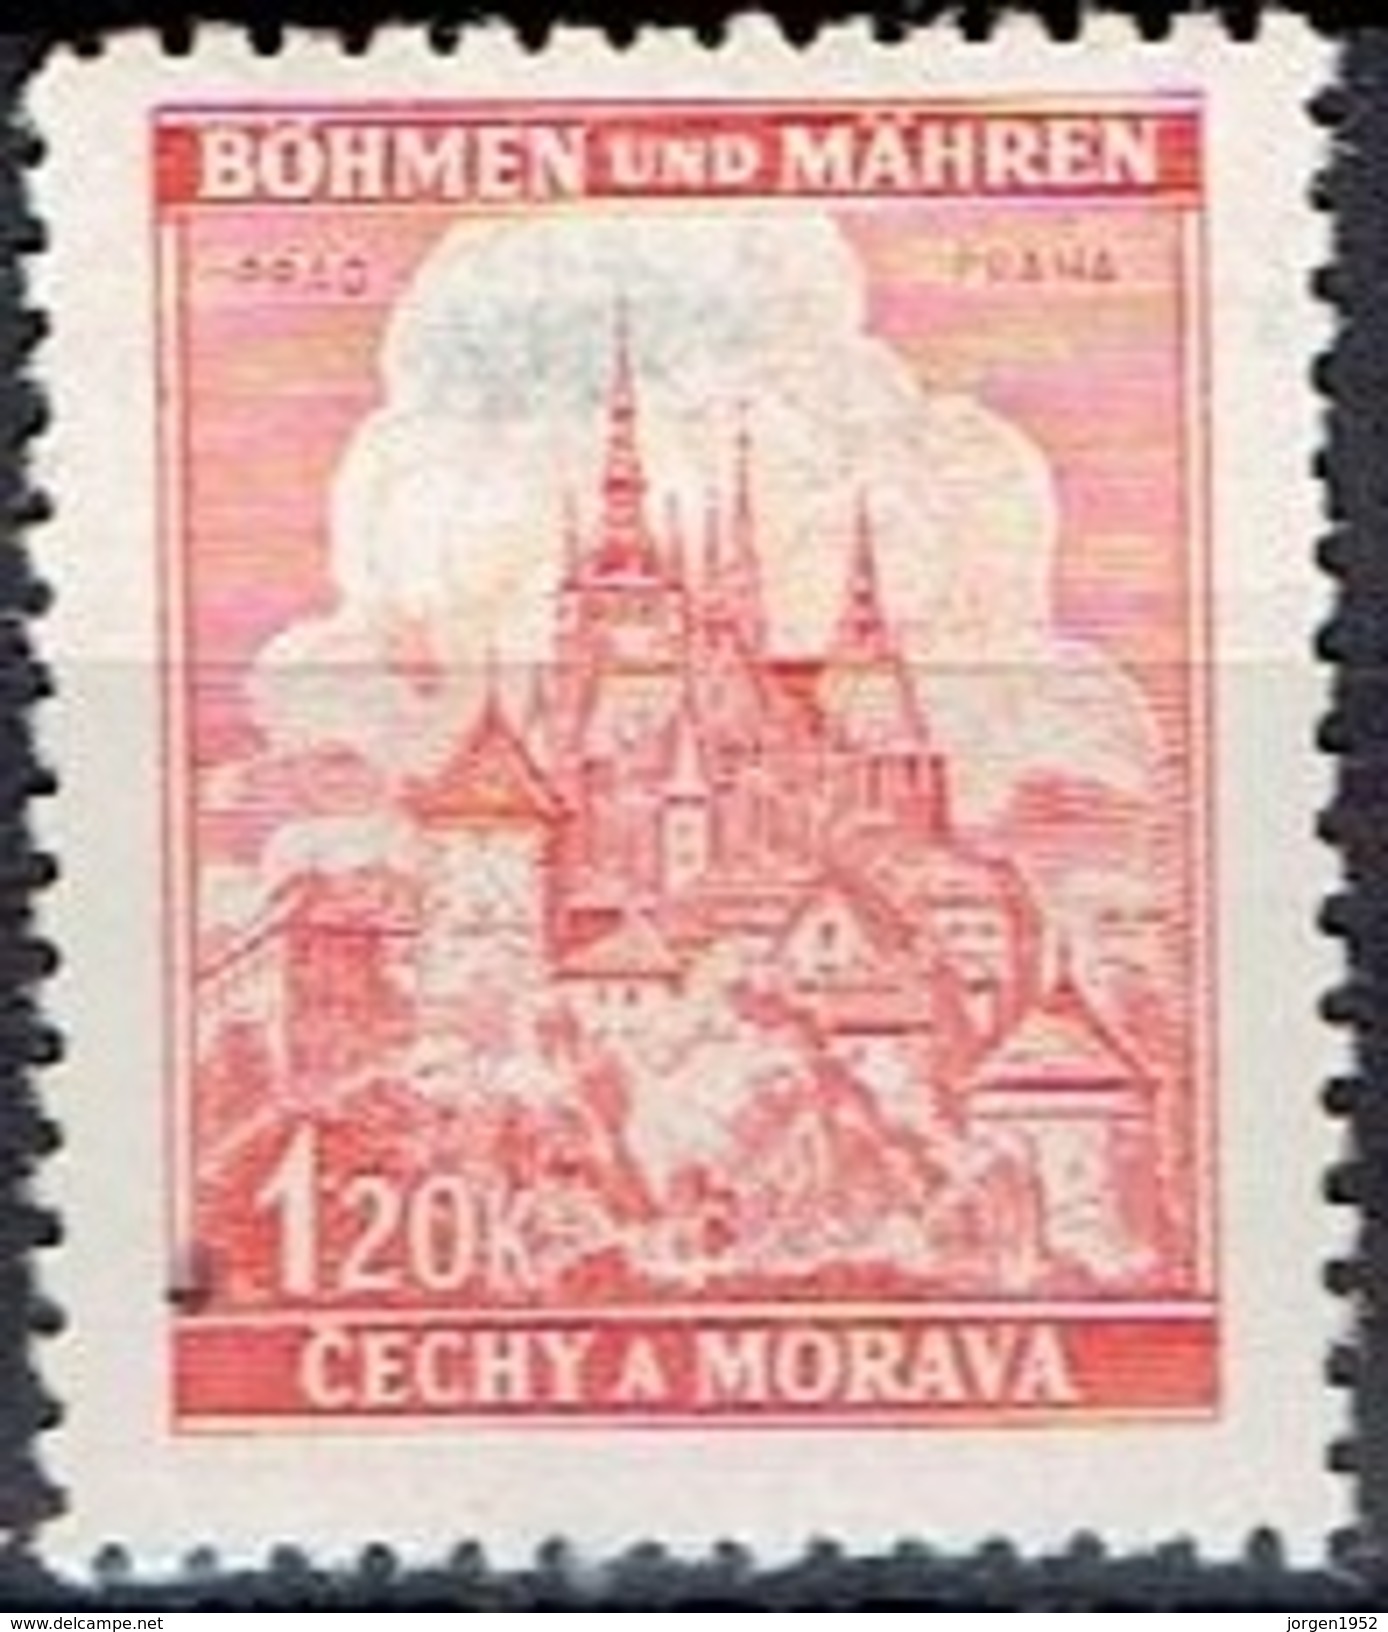 BOHEMIA & MORAVIA #  FROM 1941  STAMPWORLD 80** - Unused Stamps